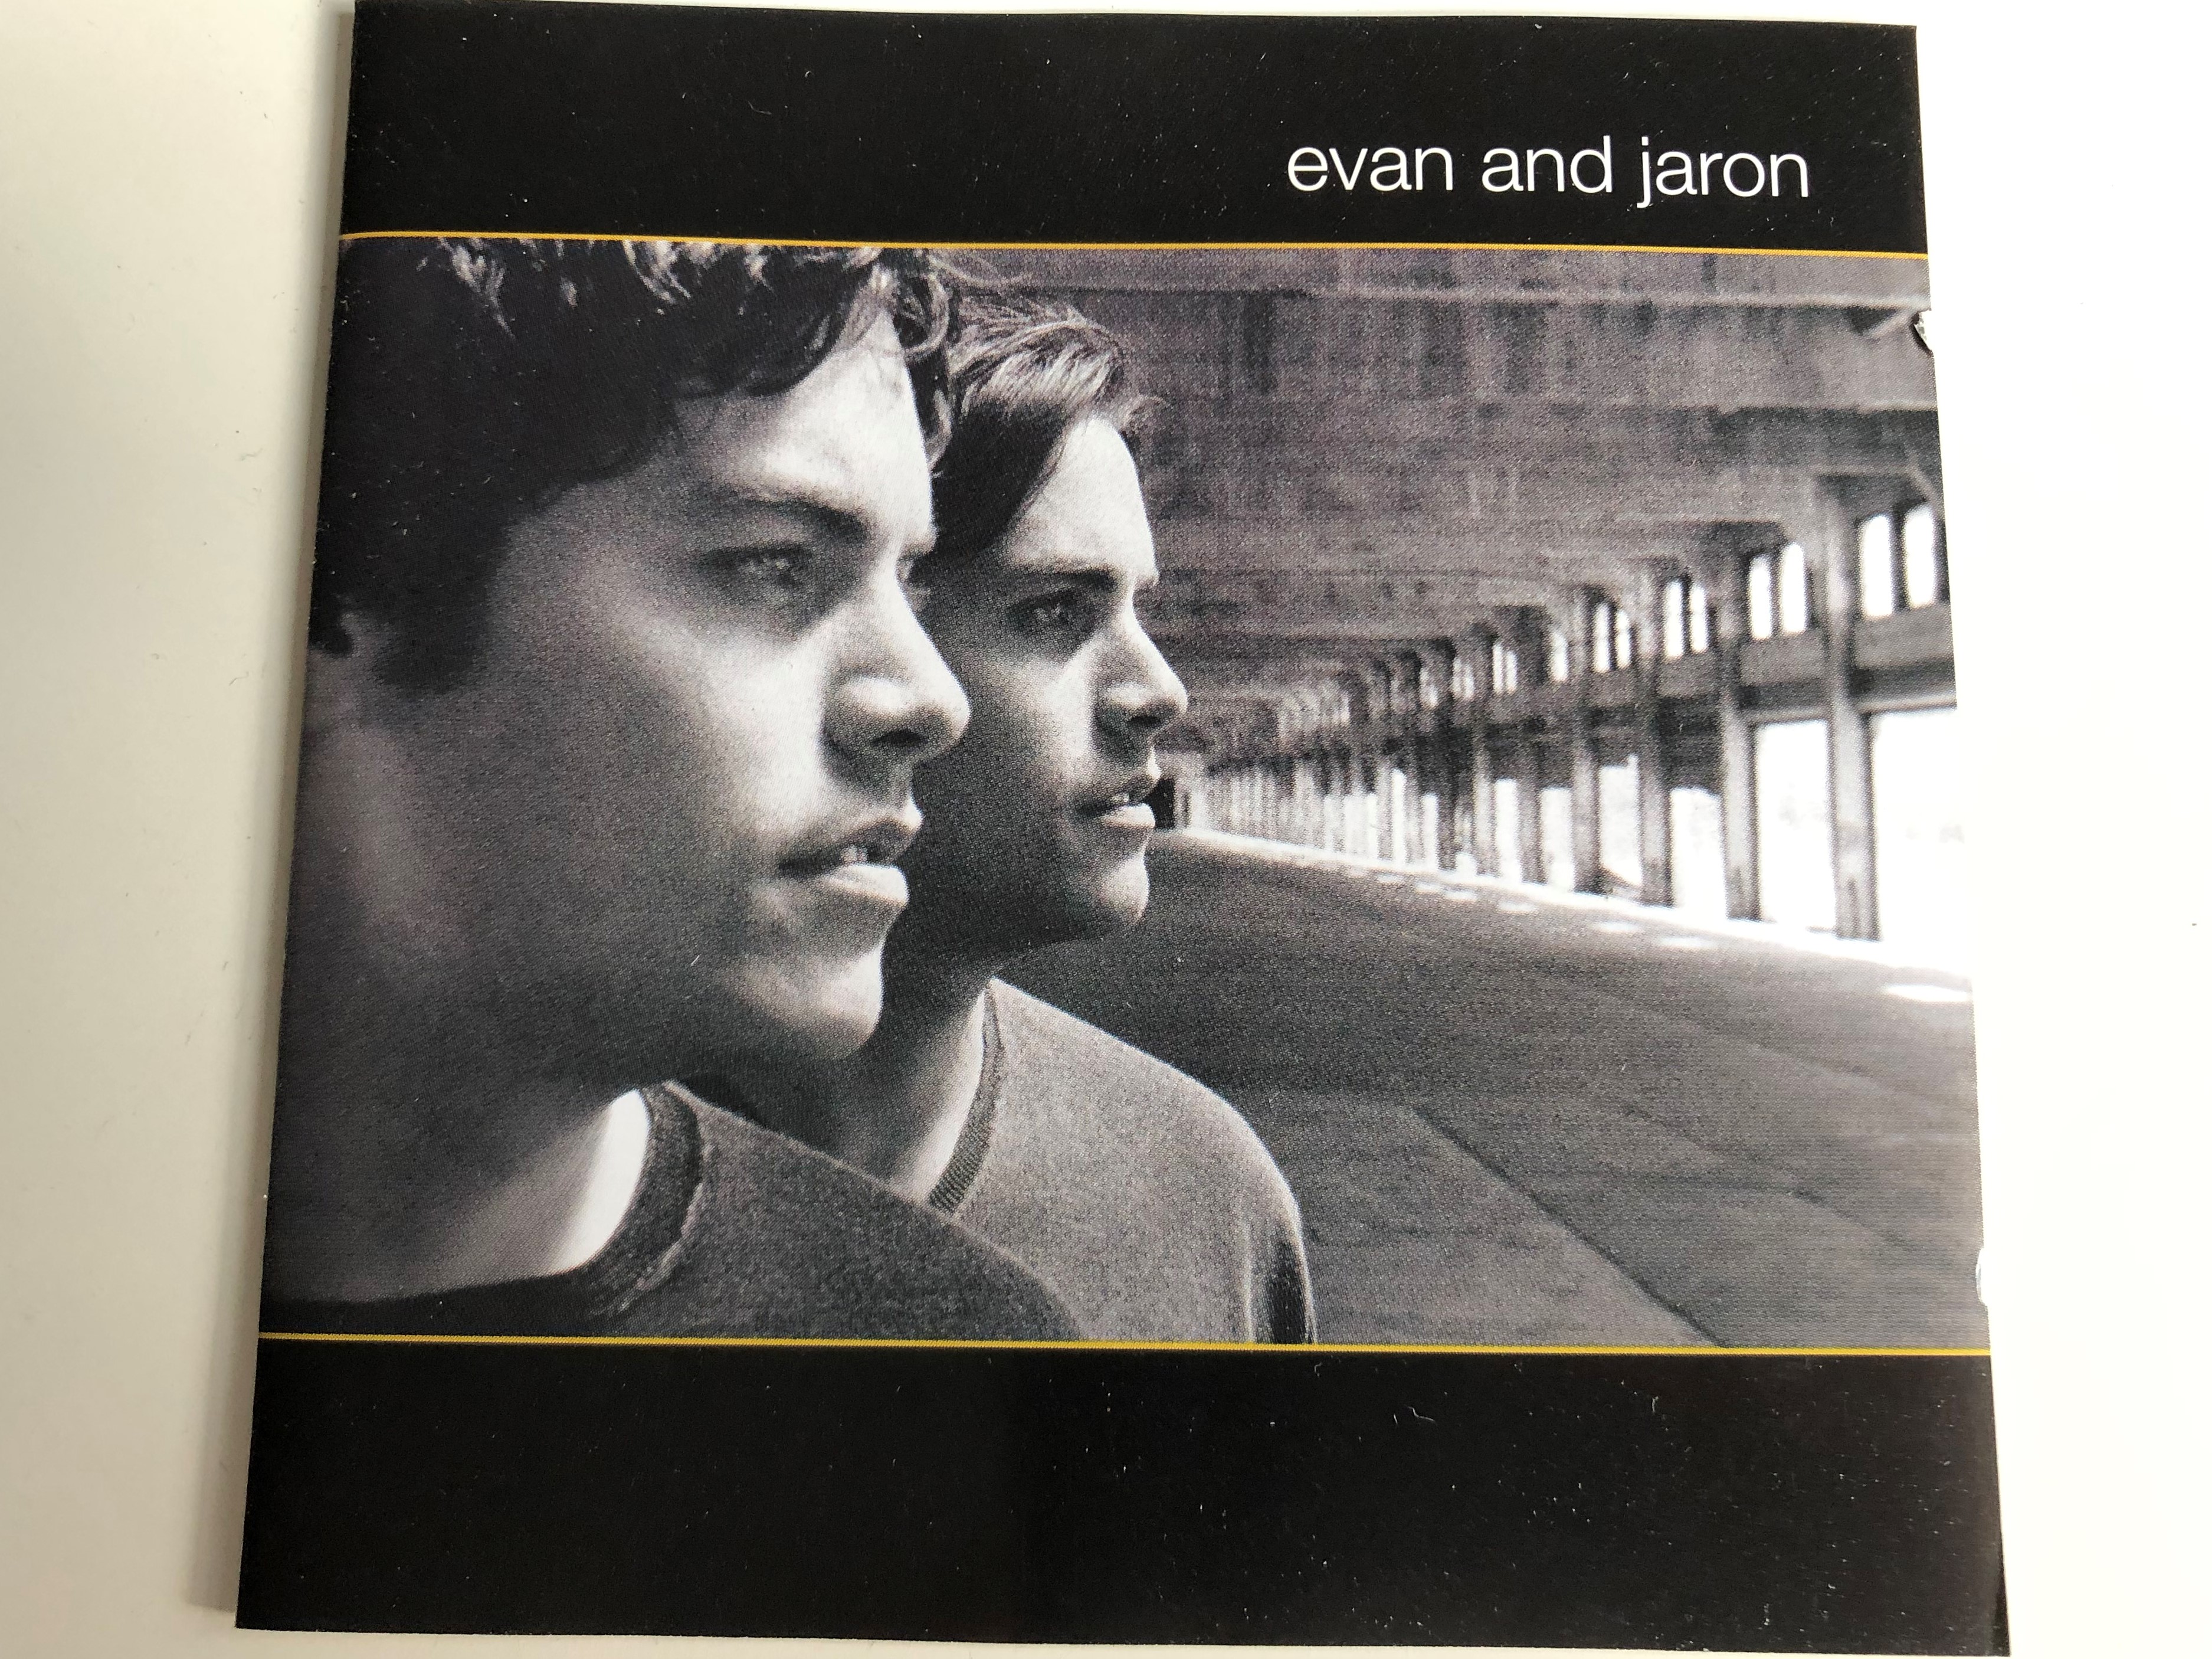 evan-and-jaron-outerspace-ready-or-not-the-distance-pick-up-the-phone-audio-cd-2000-columbia-records-col-5018102-1-.jpg